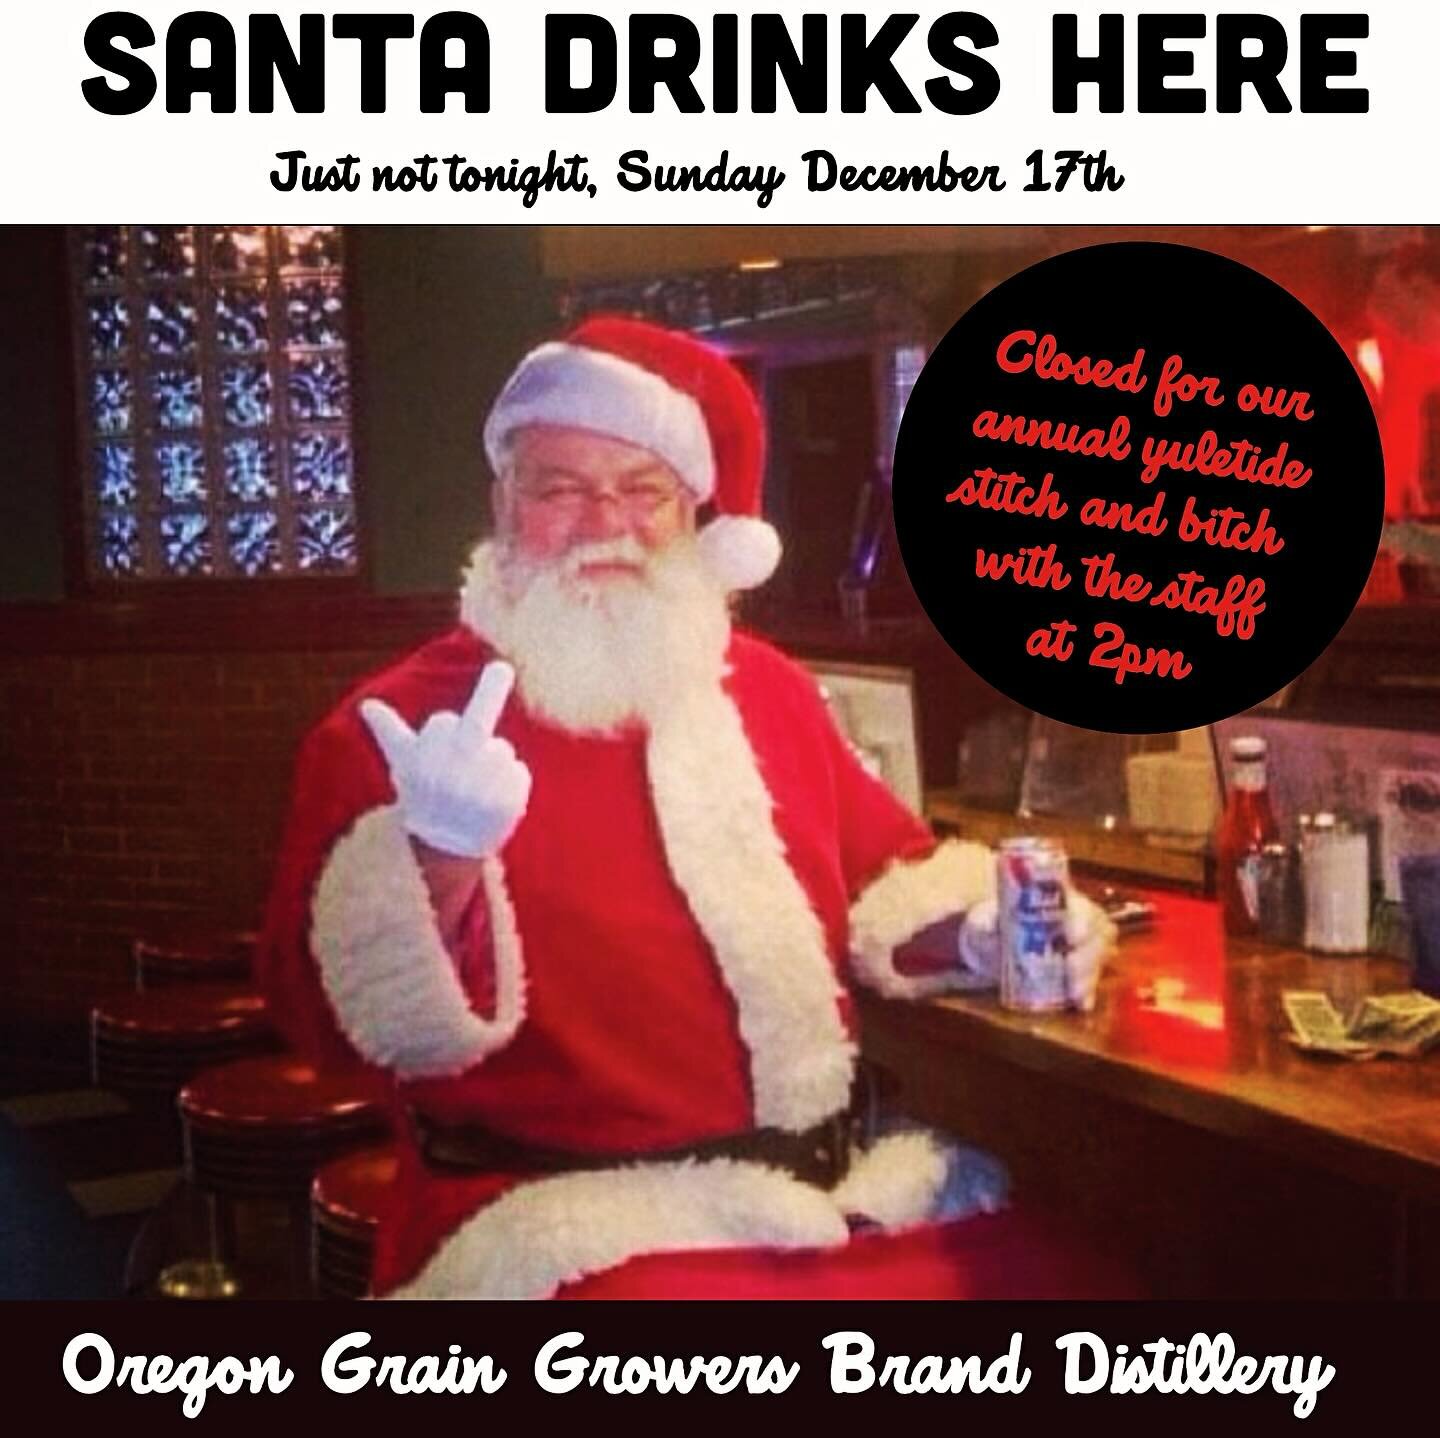 Closing at 2pm for our annual staff Yuletide dance party and airing of grievances. Back to normal next week. #pendletonoregon #santa #holidayparty #yuletide